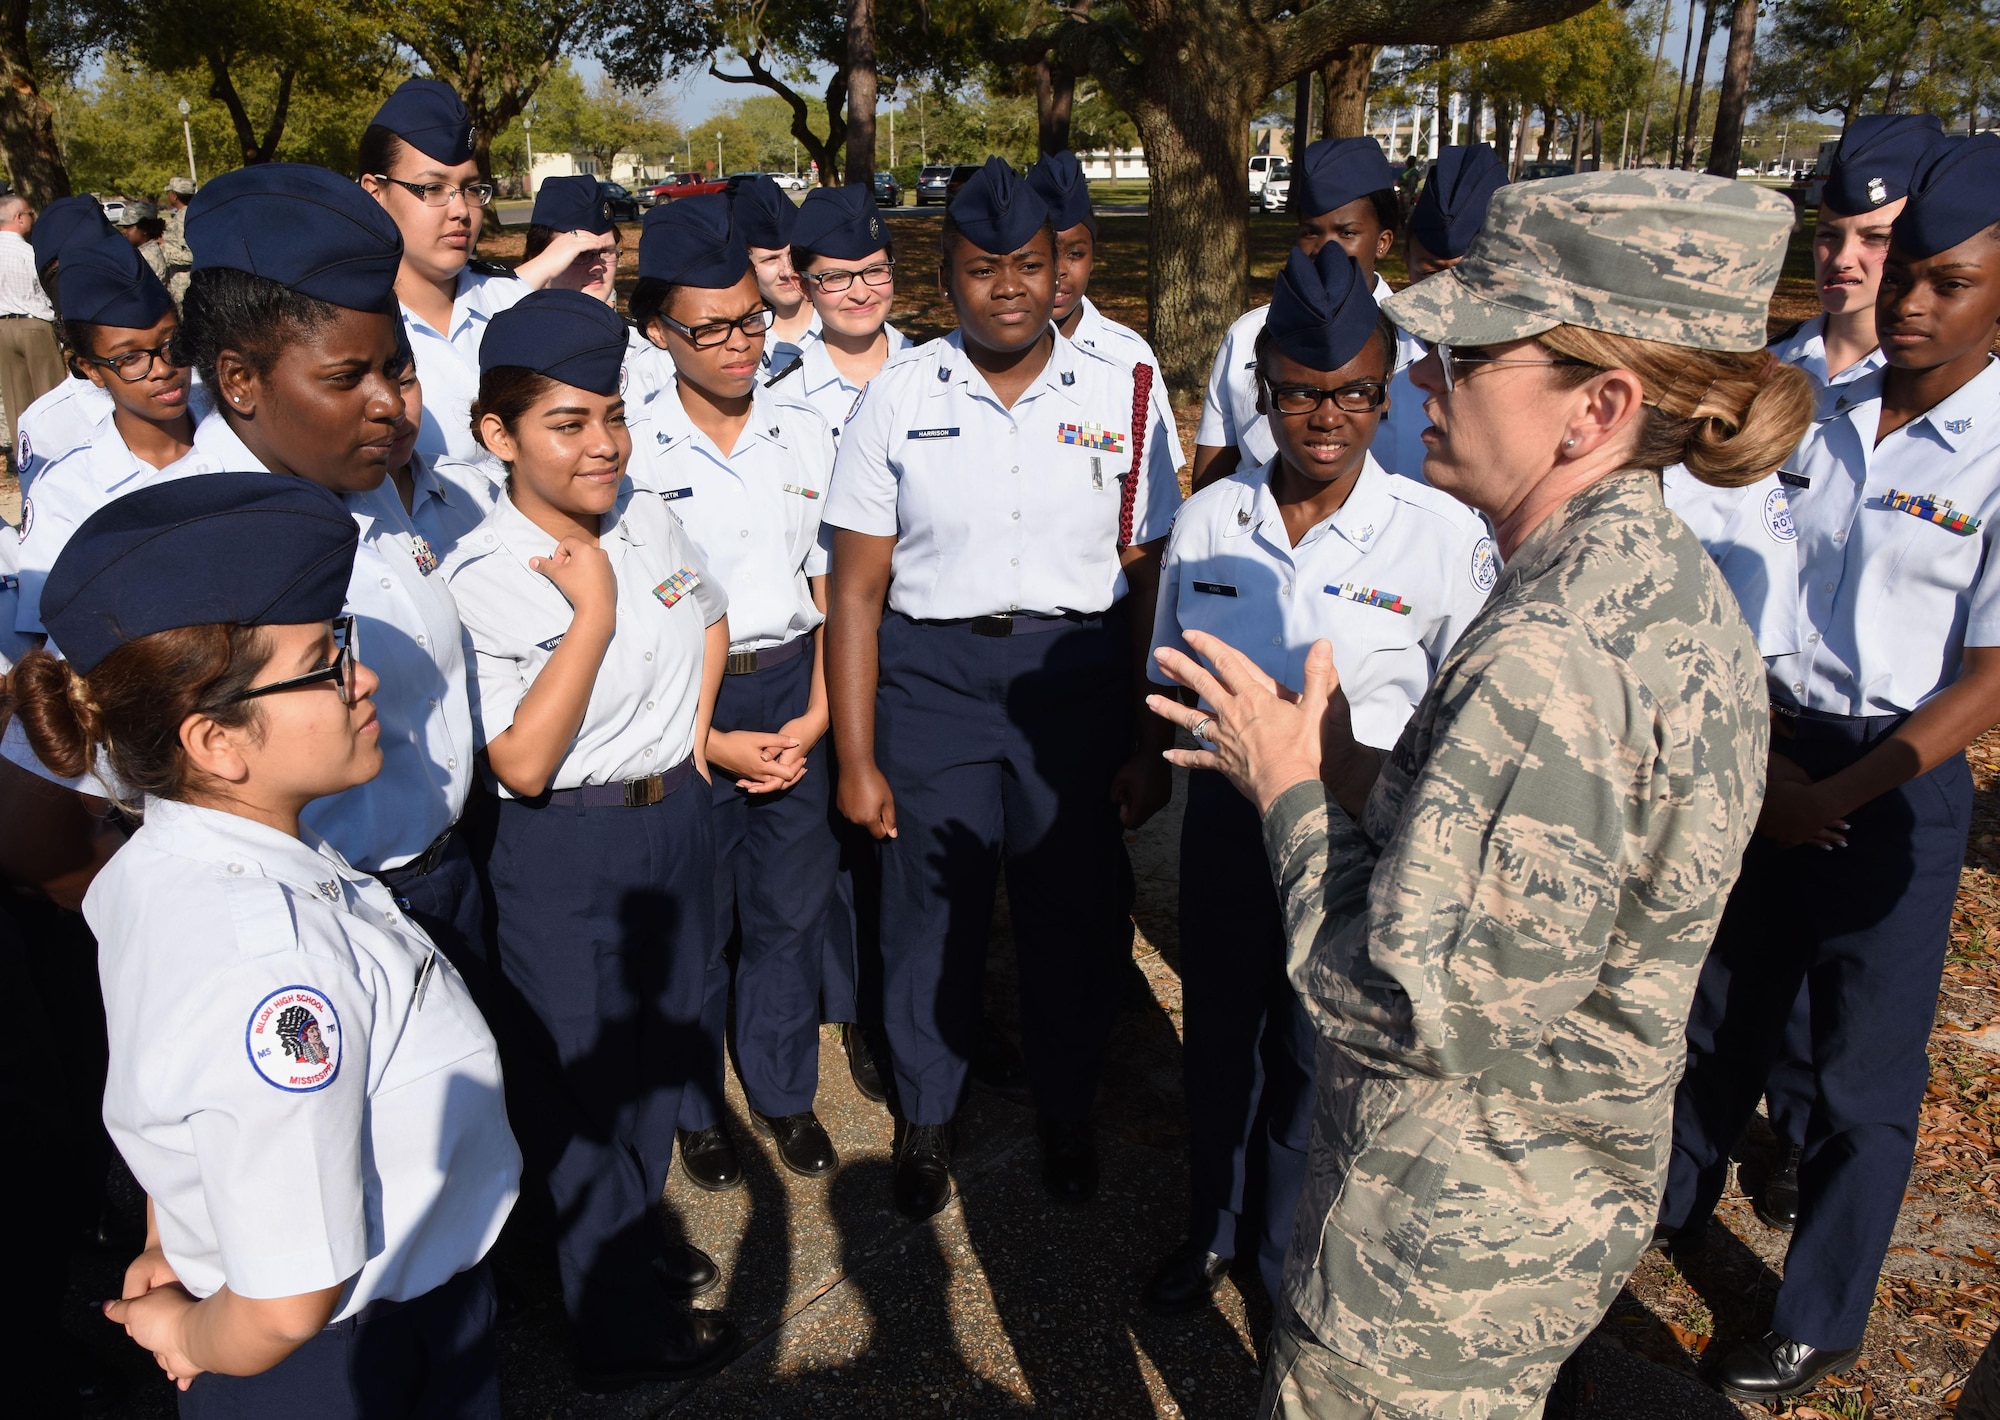 Col. Michele Edmondson, 81st Training Wing commander, speaks to Biloxi High School Junior ROTC cadets following a Women’s History Month all-female retreat ceremony March 21, 2017, on Keesler Air Force Base, Miss. The theme of 2017 WHM is “Honoring Trailblazing Women in Labor and Business” to honor women who have successfully challenged the female role in business and the paid labor force. (U.S. Air Force photo by Kemberly Groue)